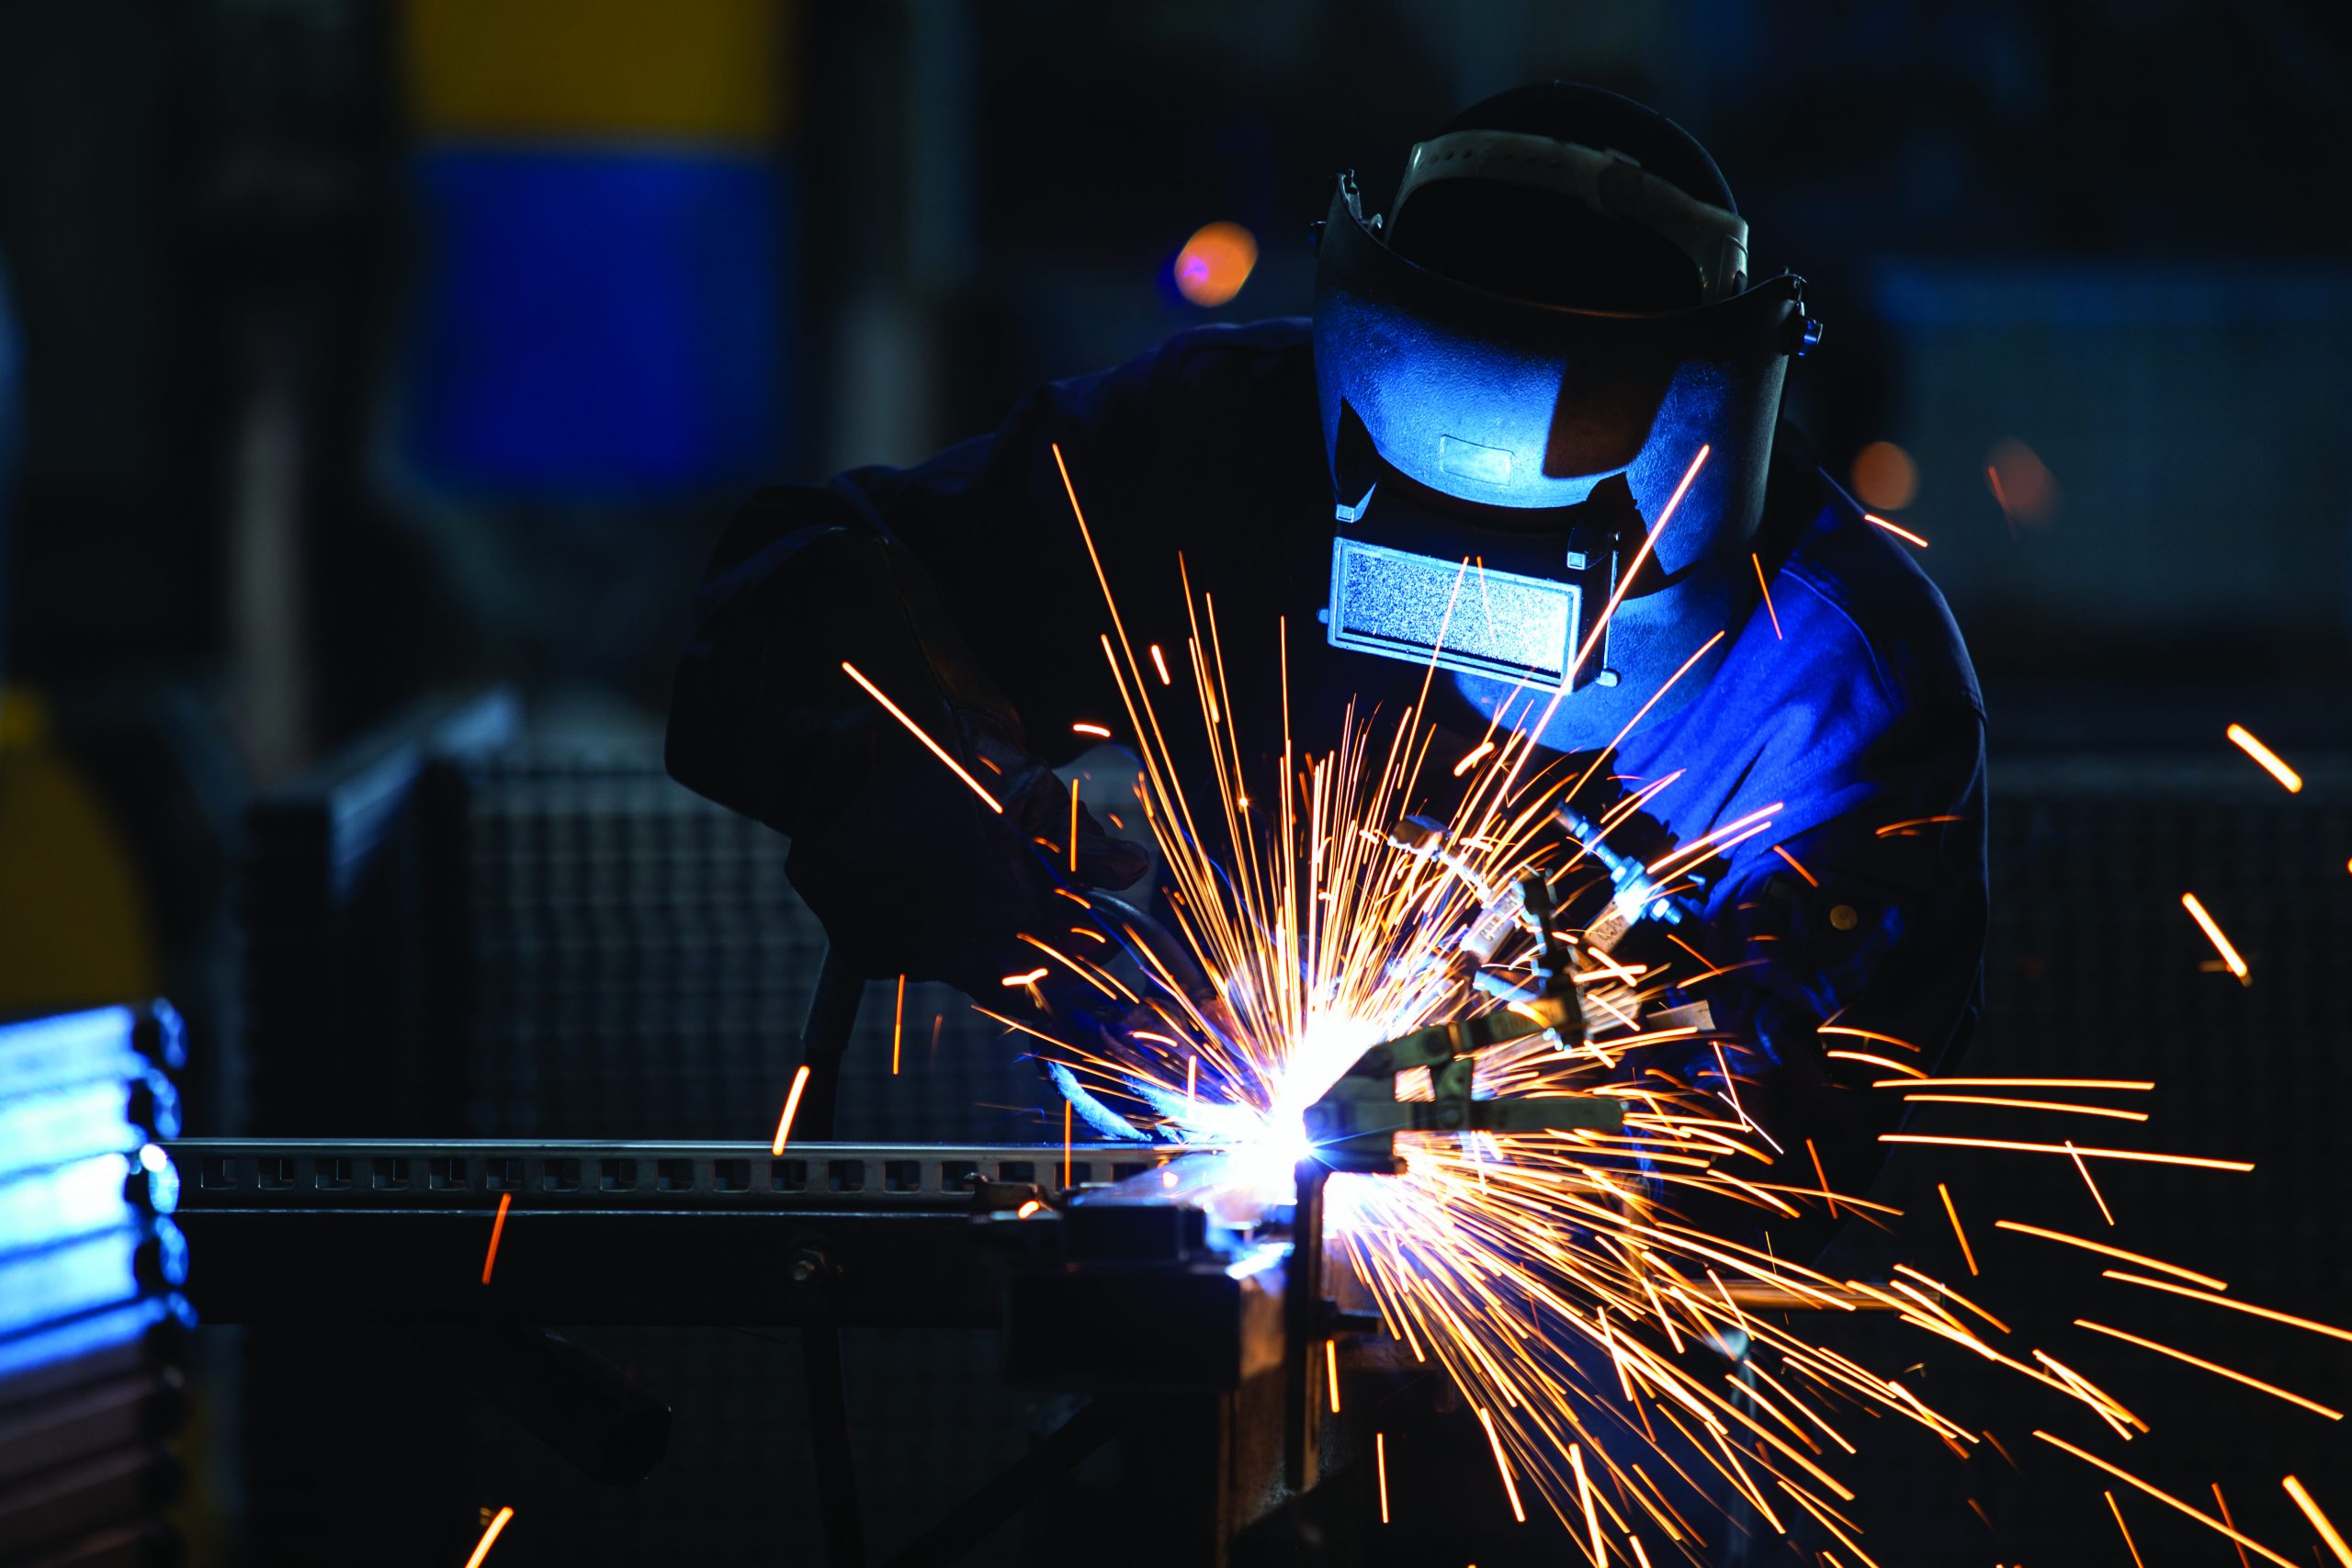 The featured image from Industry Experts Gear Up for the 2022 Welding Summit